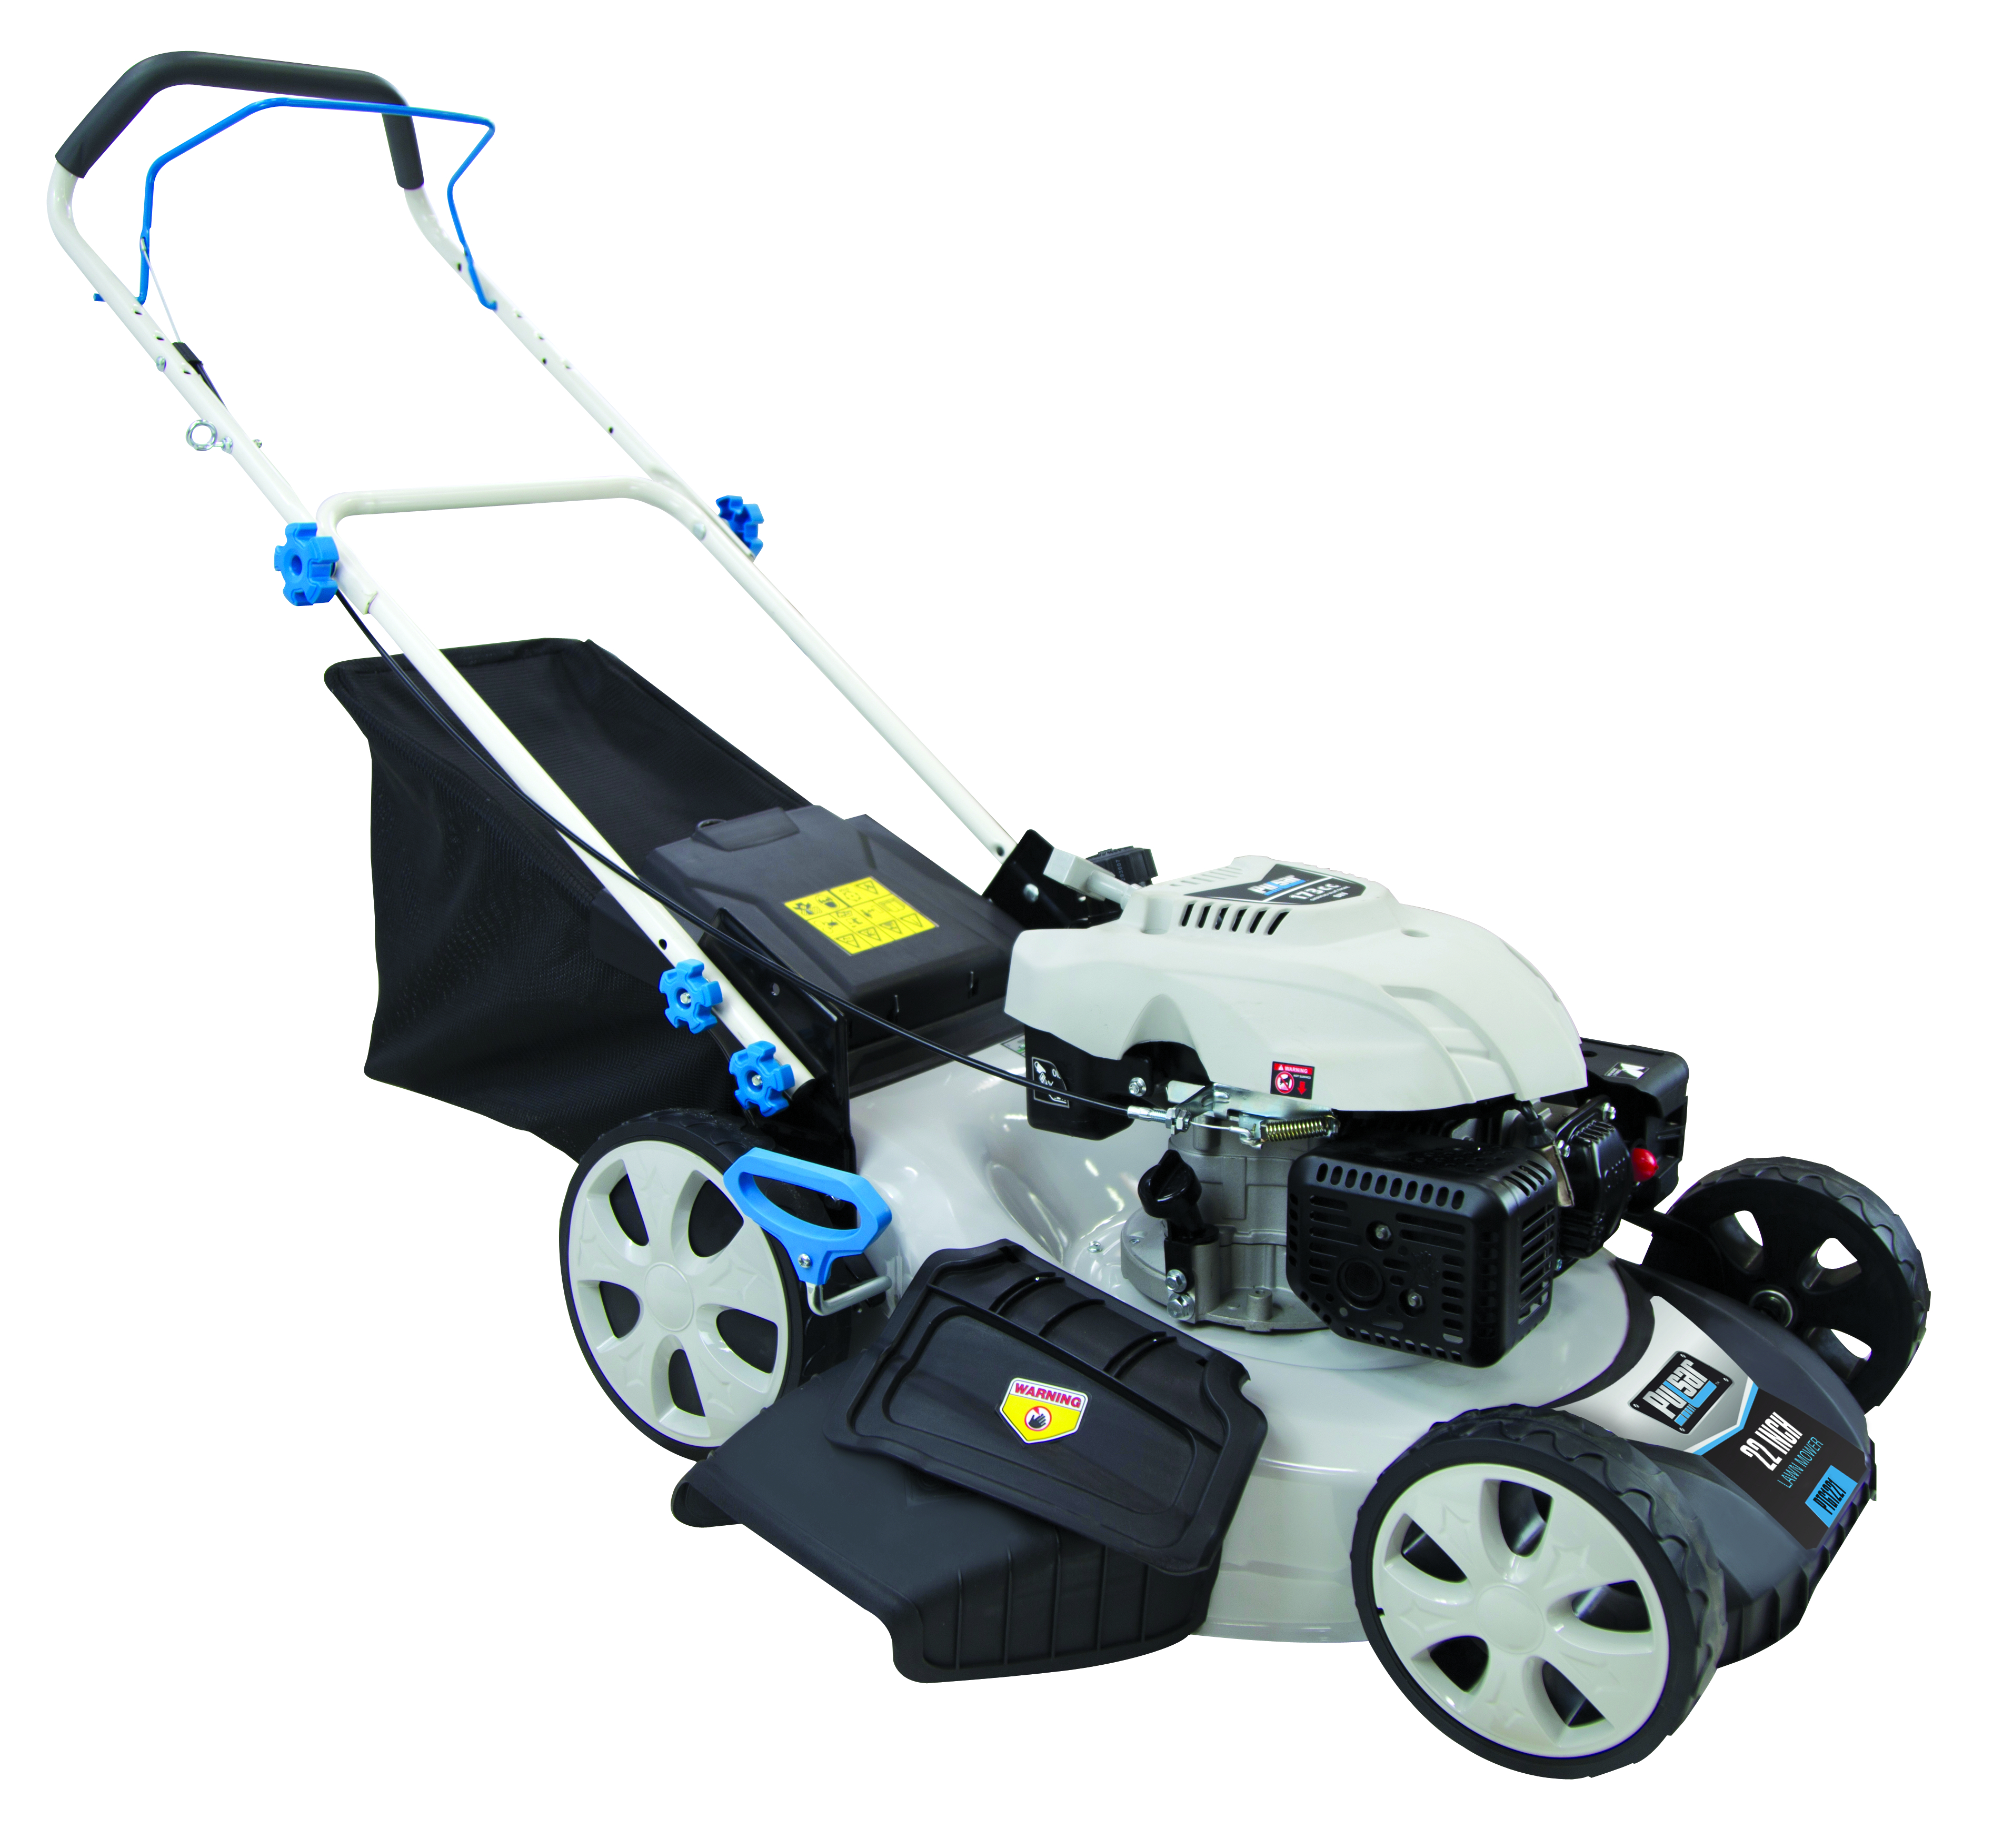 Pulsar 21” Self-Propelled Gasoline Powered Lawn Mower with 7 Position Height Adjustment, PTG1221S